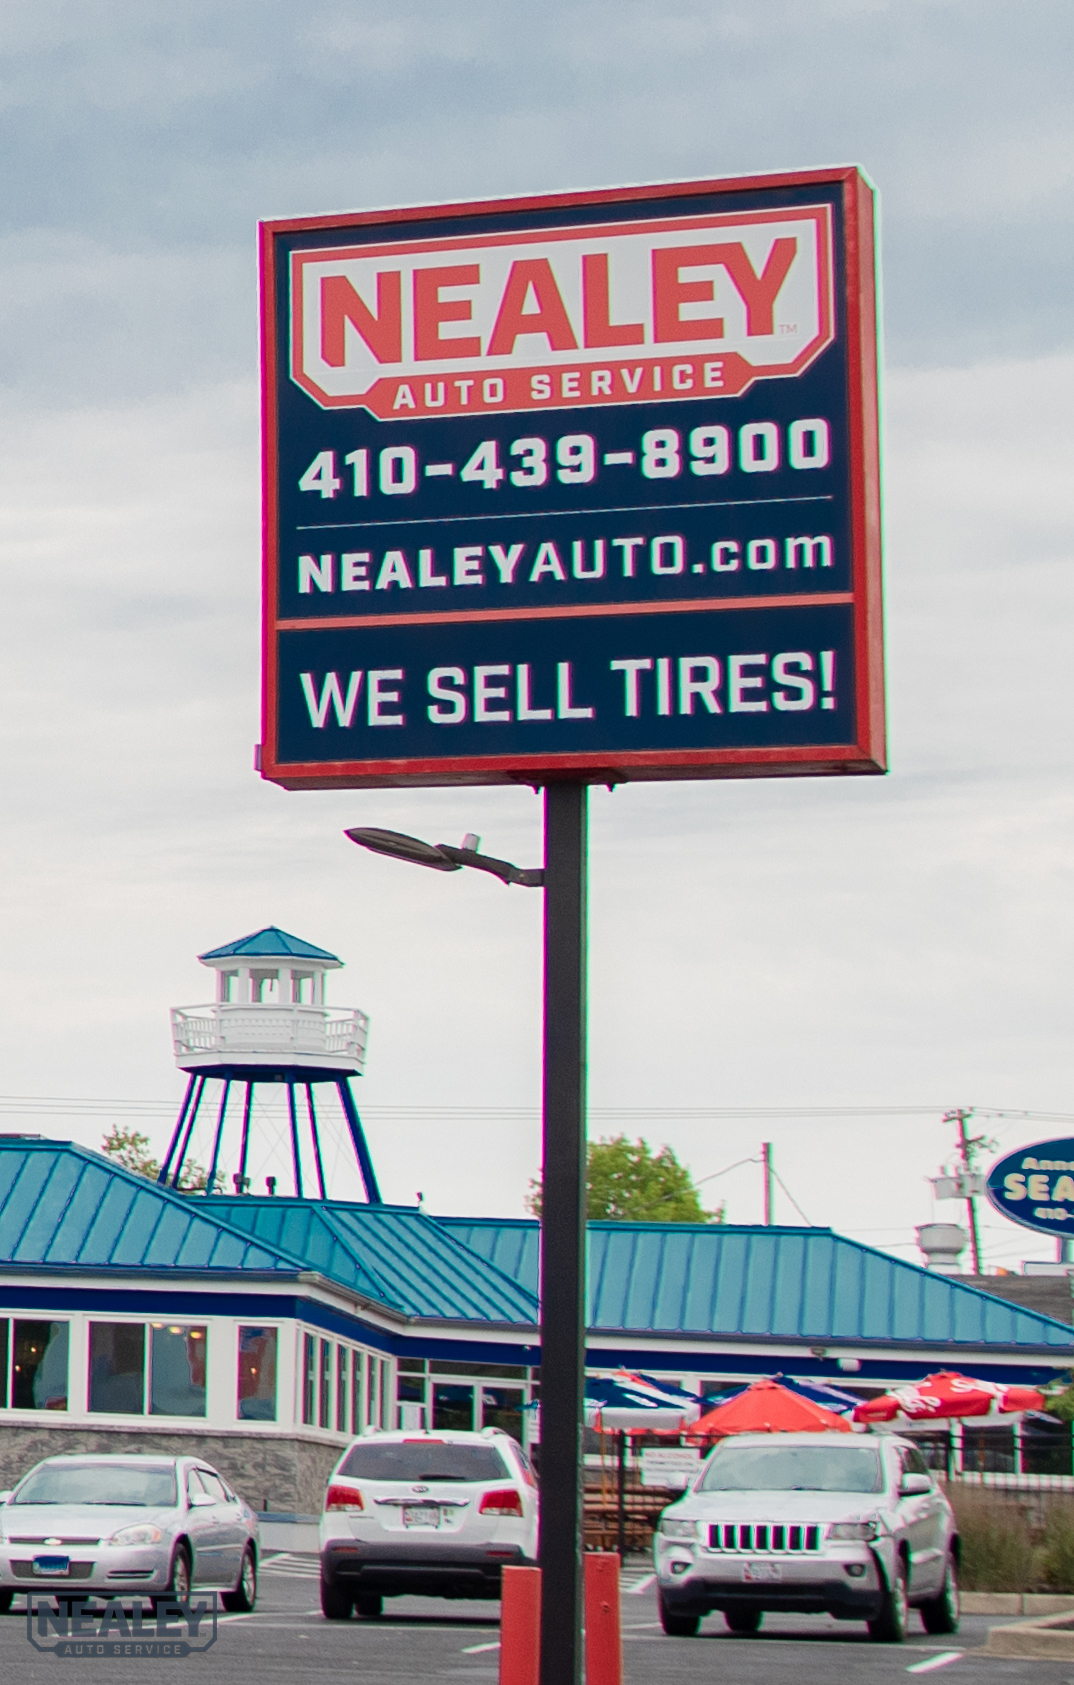 Nealey Auto Service - Our Sign in Pasadena, MD